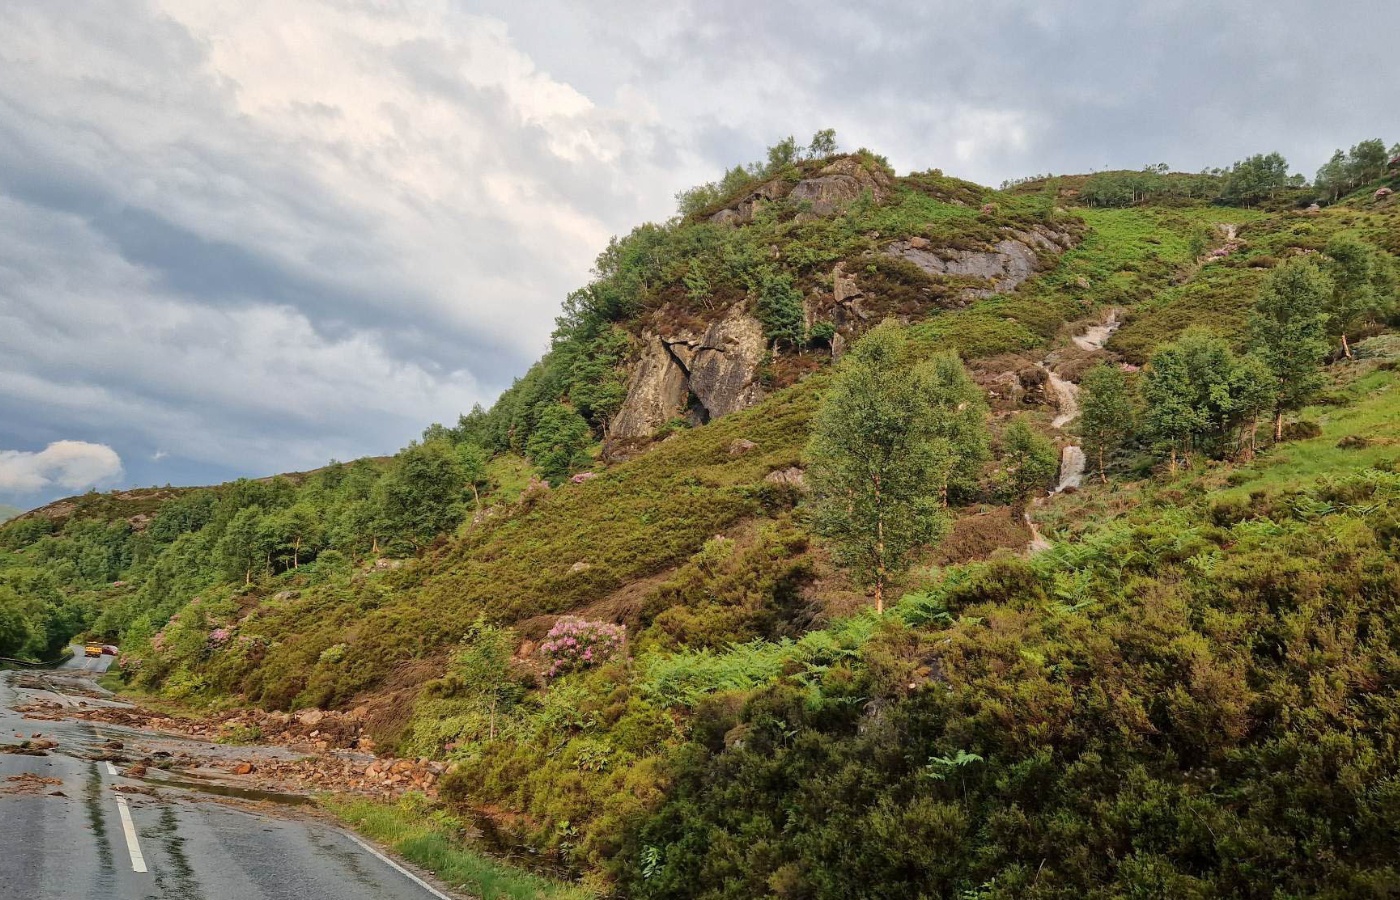 Heavy rainfall has battered the Highlands and caused landslips.